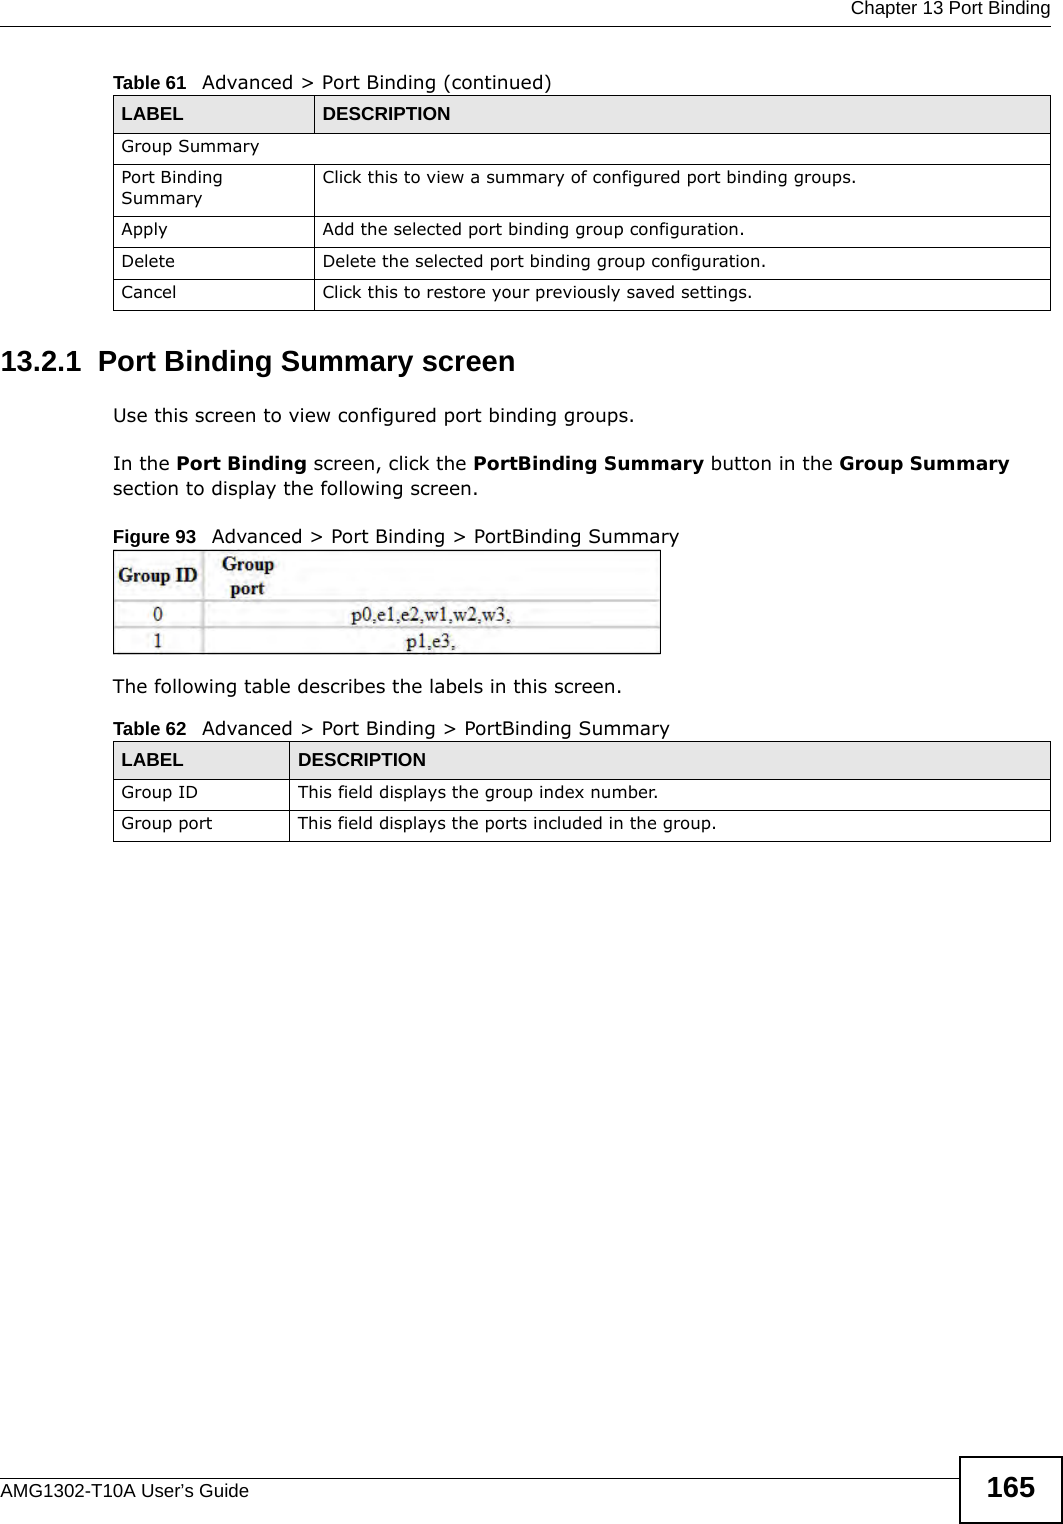  Chapter 13 Port BindingAMG1302-T10A User’s Guide 16513.2.1  Port Binding Summary screenUse this screen to view configured port binding groups.In the Port Binding screen, click the PortBinding Summary button in the Group Summary section to display the following screen.Figure 93   Advanced &gt; Port Binding &gt; PortBinding SummaryThe following table describes the labels in this screen.  Group SummaryPort Binding SummaryClick this to view a summary of configured port binding groups.Apply Add the selected port binding group configuration.Delete Delete the selected port binding group configuration. Cancel Click this to restore your previously saved settings.Table 61   Advanced &gt; Port Binding (continued)LABEL DESCRIPTIONTable 62   Advanced &gt; Port Binding &gt; PortBinding SummaryLABEL DESCRIPTIONGroup ID This field displays the group index number.Group port This field displays the ports included in the group.